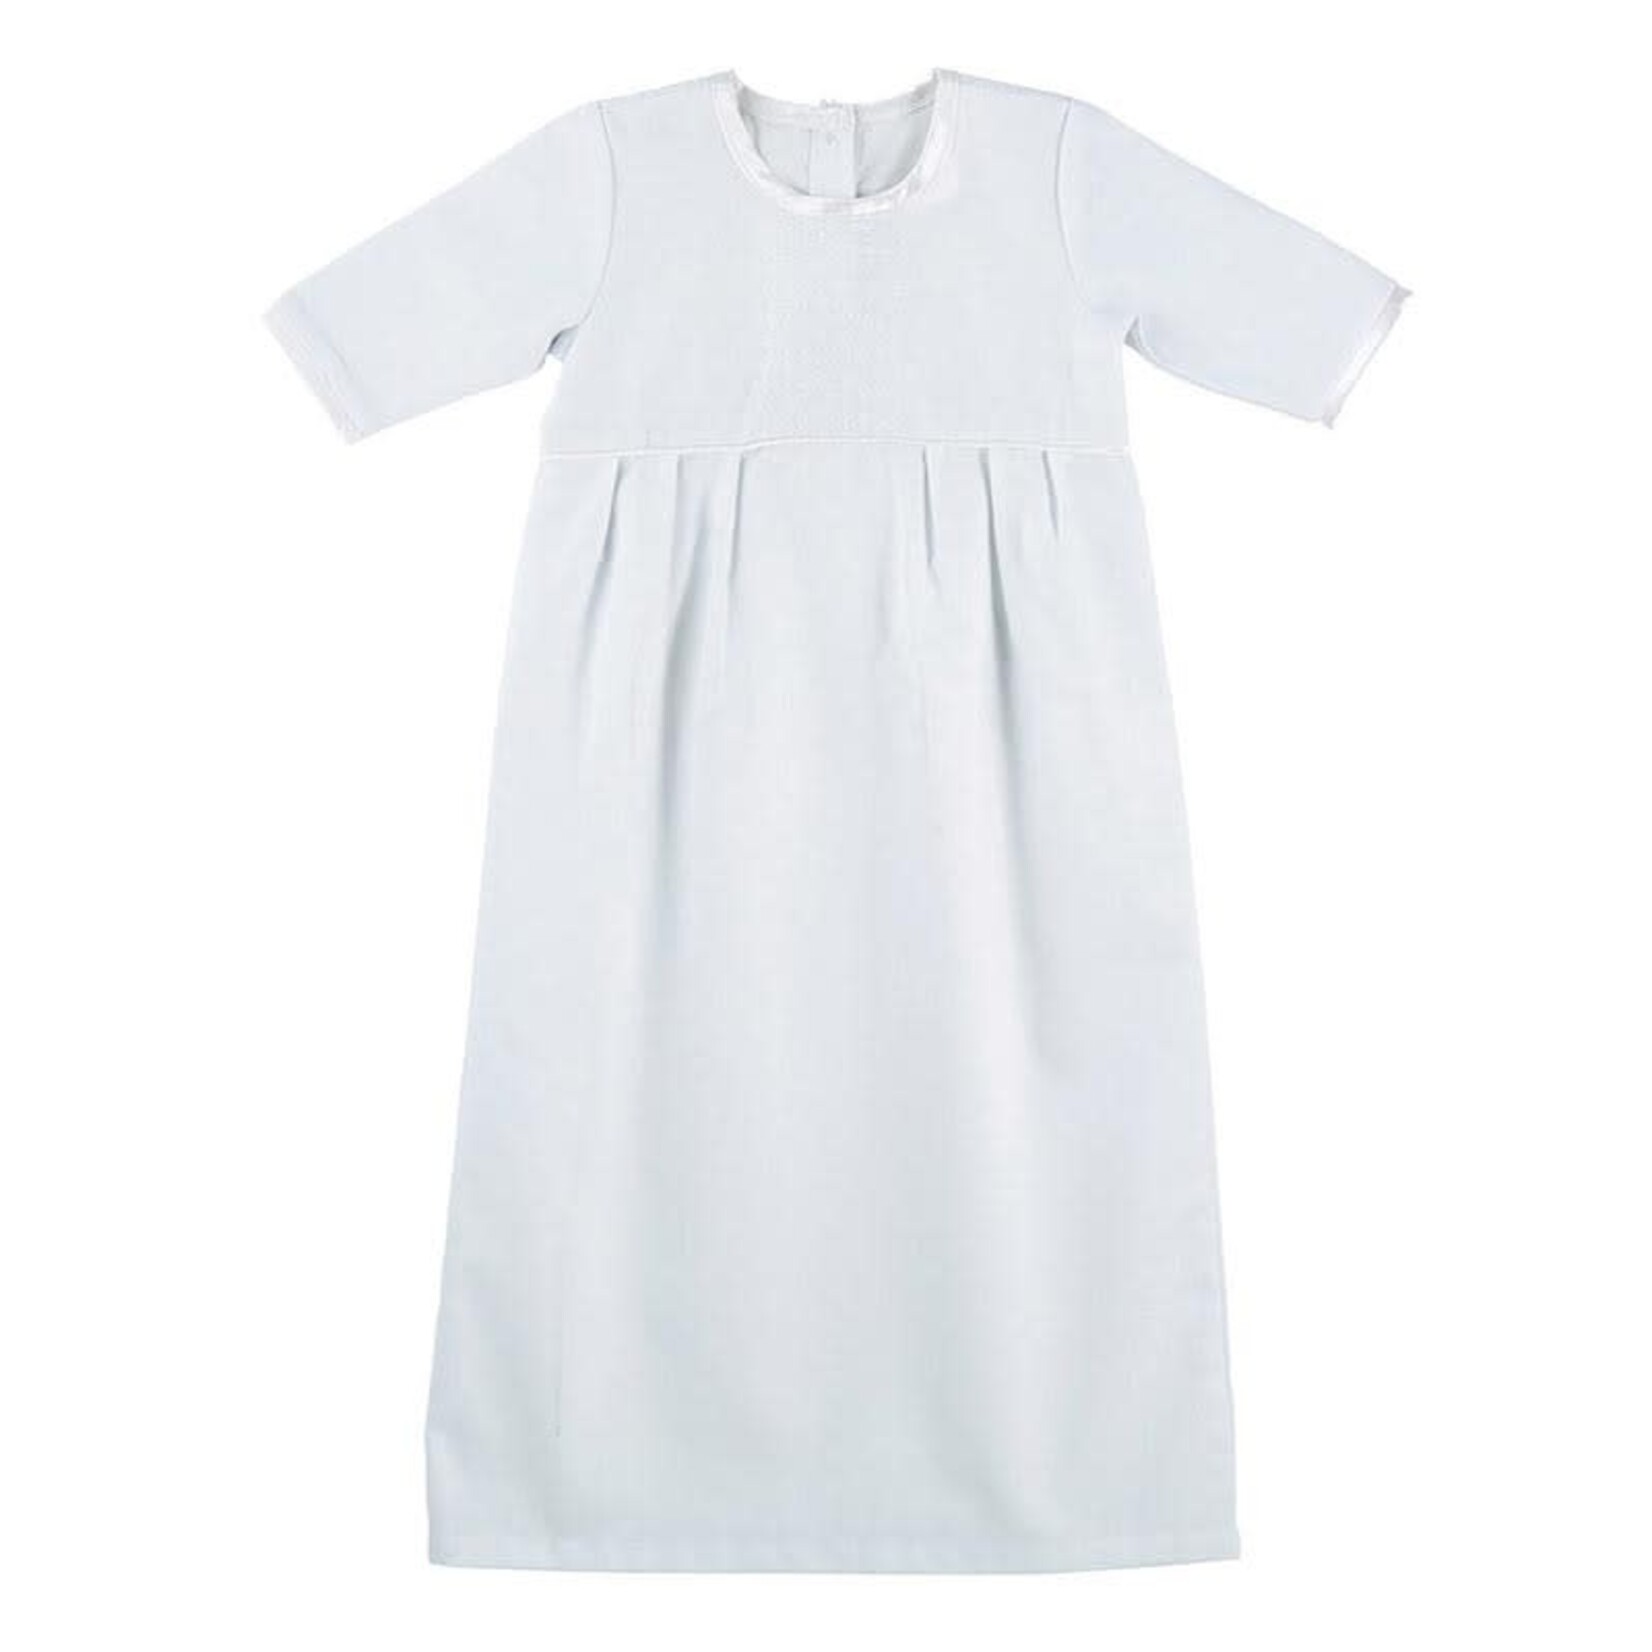 Simple Baptismal Gown for Baby